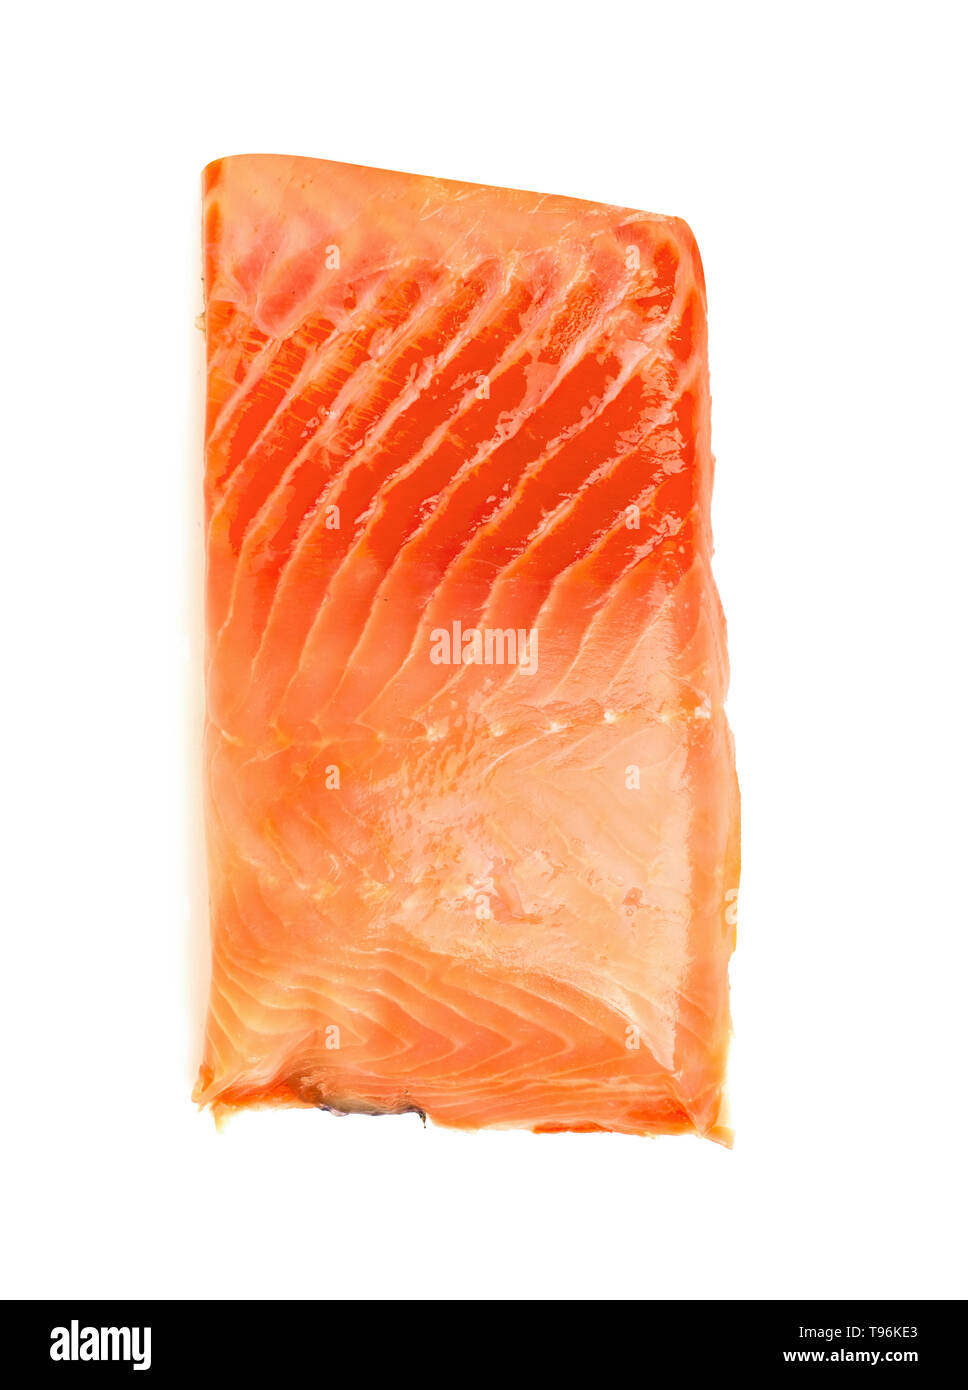 Salmon saline red fish steak isolated on a white background Stock Photo